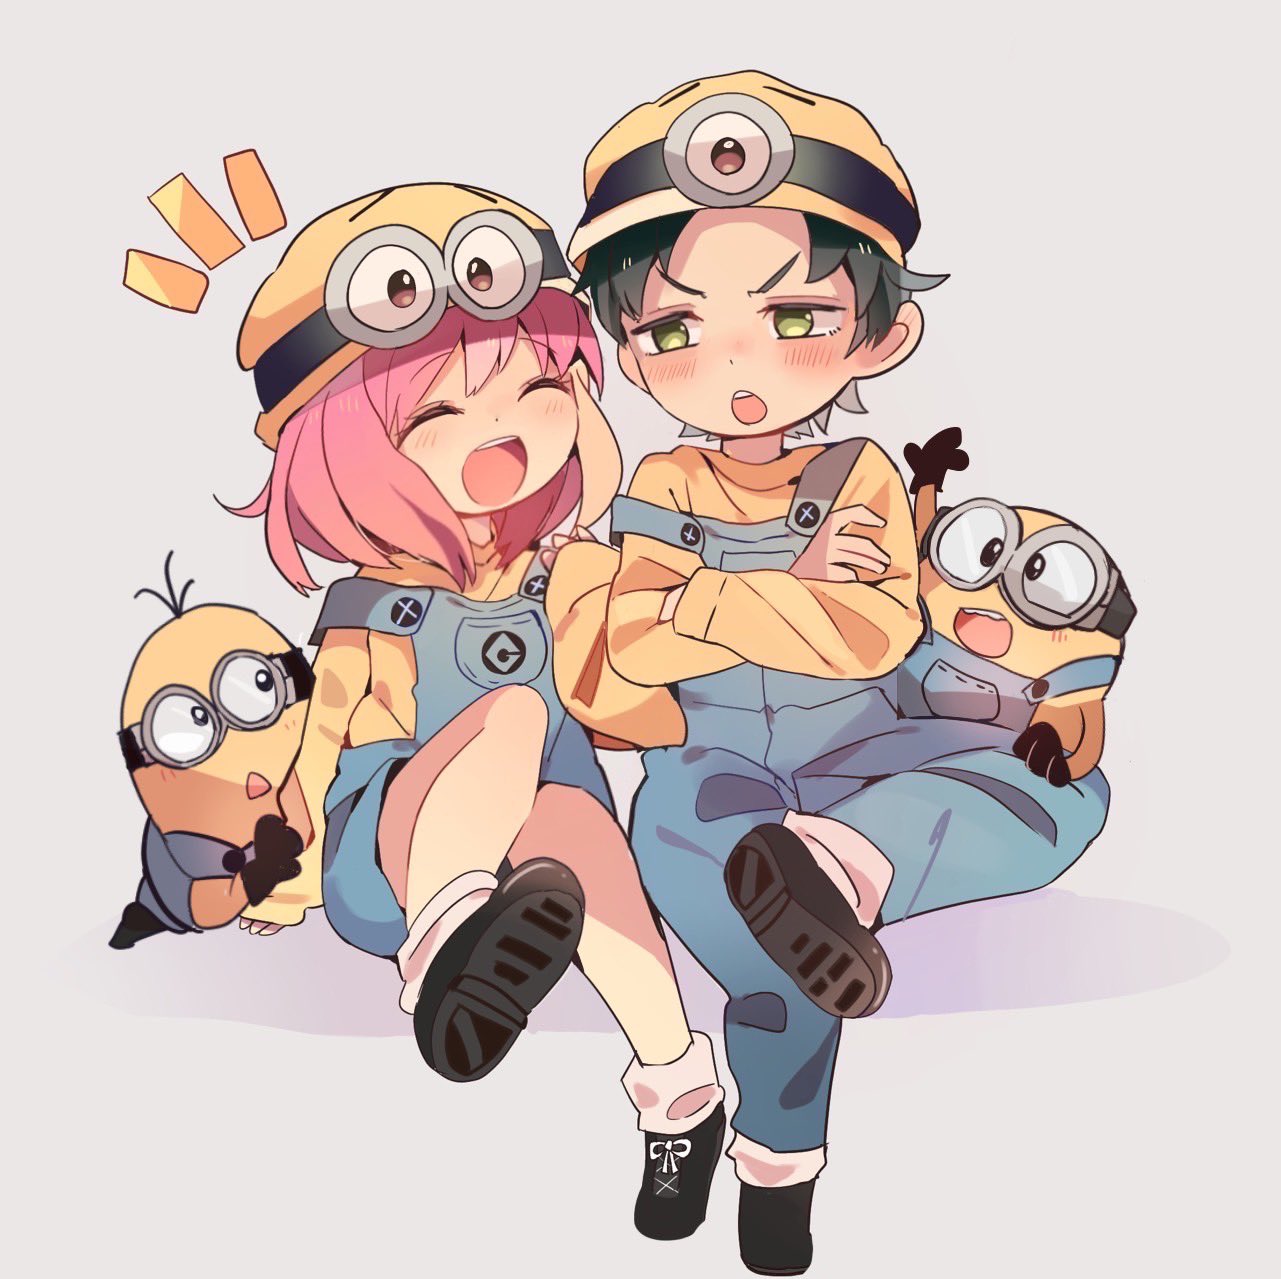 1boy 1girl 2others anya_(spy_x_family) bangs black_footwear black_hair blush child commentary_request cosplay crossed_arms damian_desmond despicable_me female_child gloves goggles green_eyes highres looking_at_another male_child minion_(despicable_me) minion_(despicable_me)_(cosplay) multiple_others nose_blush open_mouth overalls pink_hair short_hair smile spy_x_family teeth upper_teeth white_background yellow_headwear yupo_0322